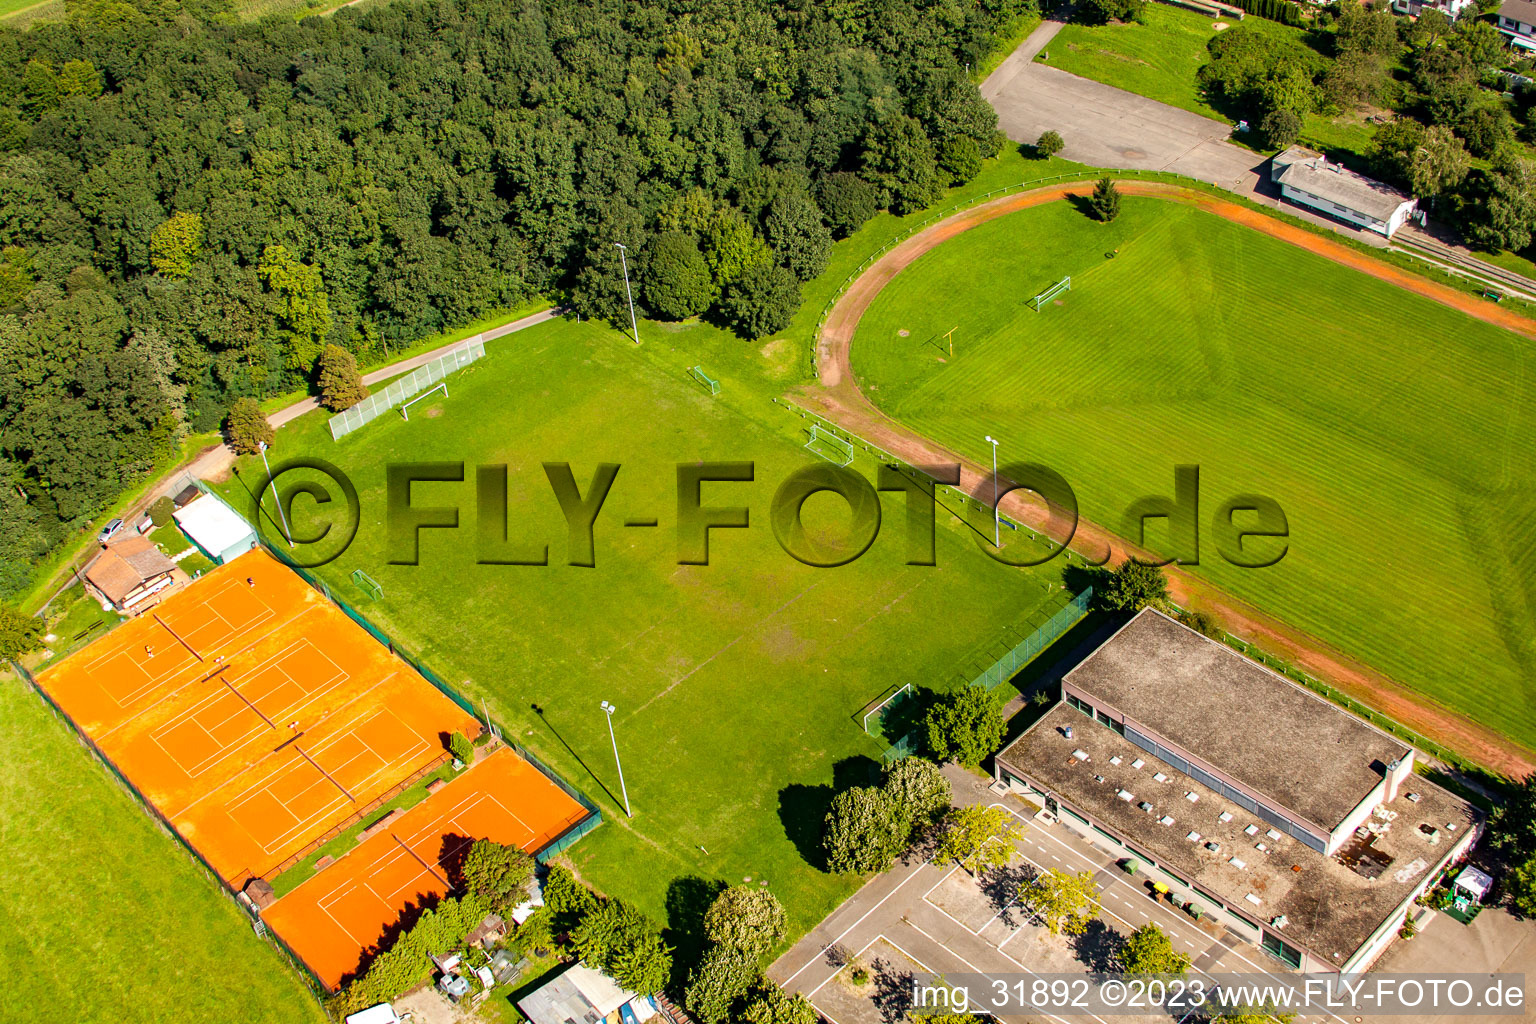 Aerial photograpy of Football club 1919 Rauental in the district Rauental in Rastatt in the state Baden-Wuerttemberg, Germany